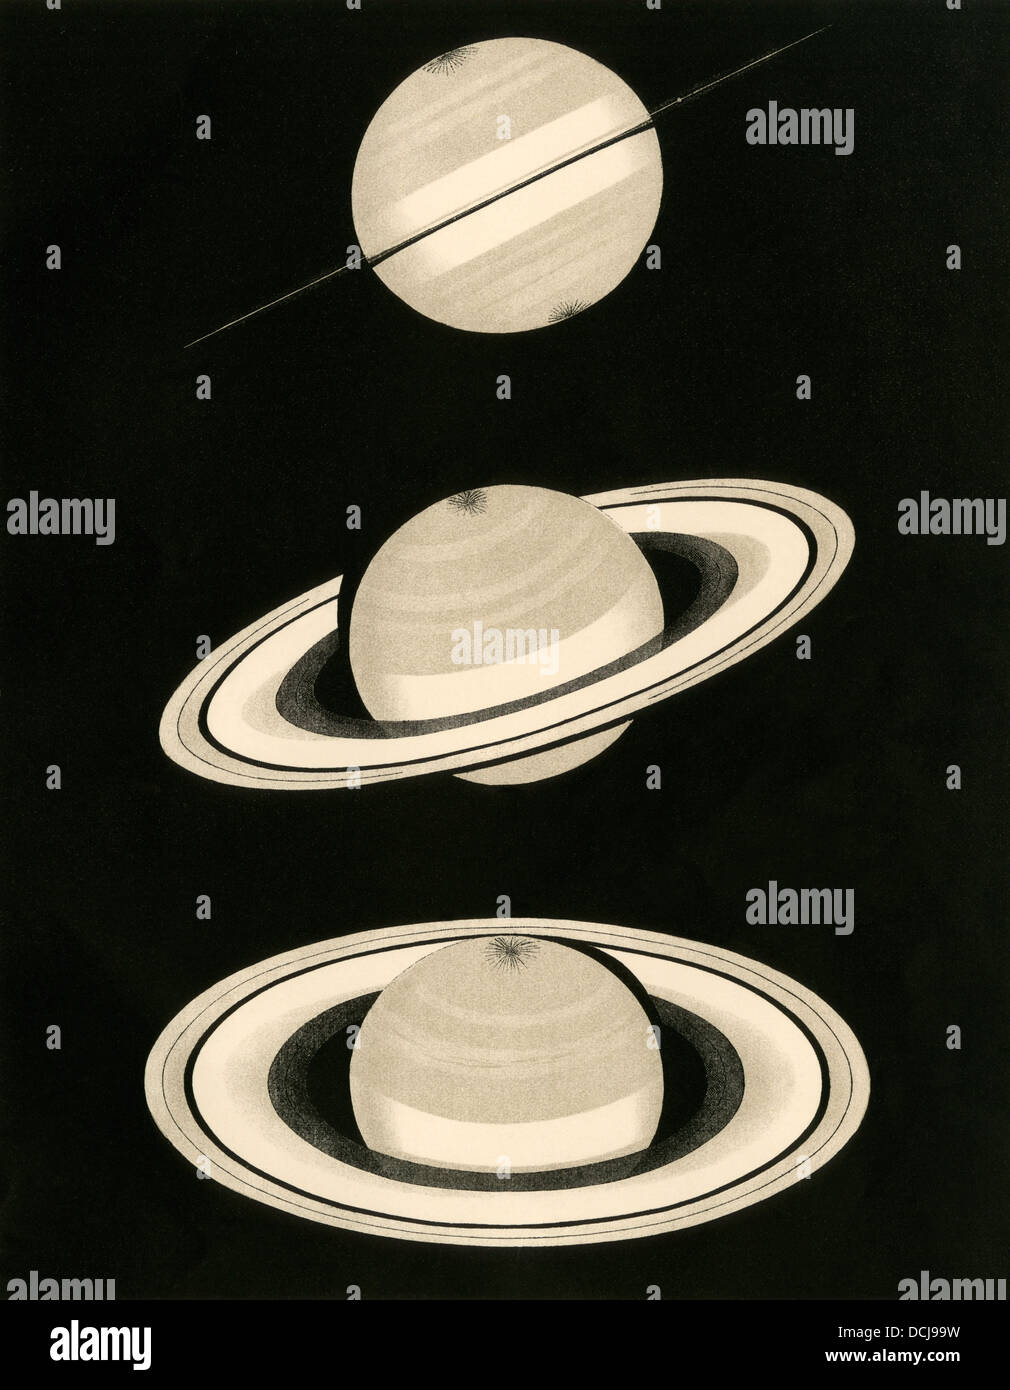 Saturn as observed by telescope in 1862 (top), November 1858, and March 1858 (bottom). Duotone engraving Stock Photo